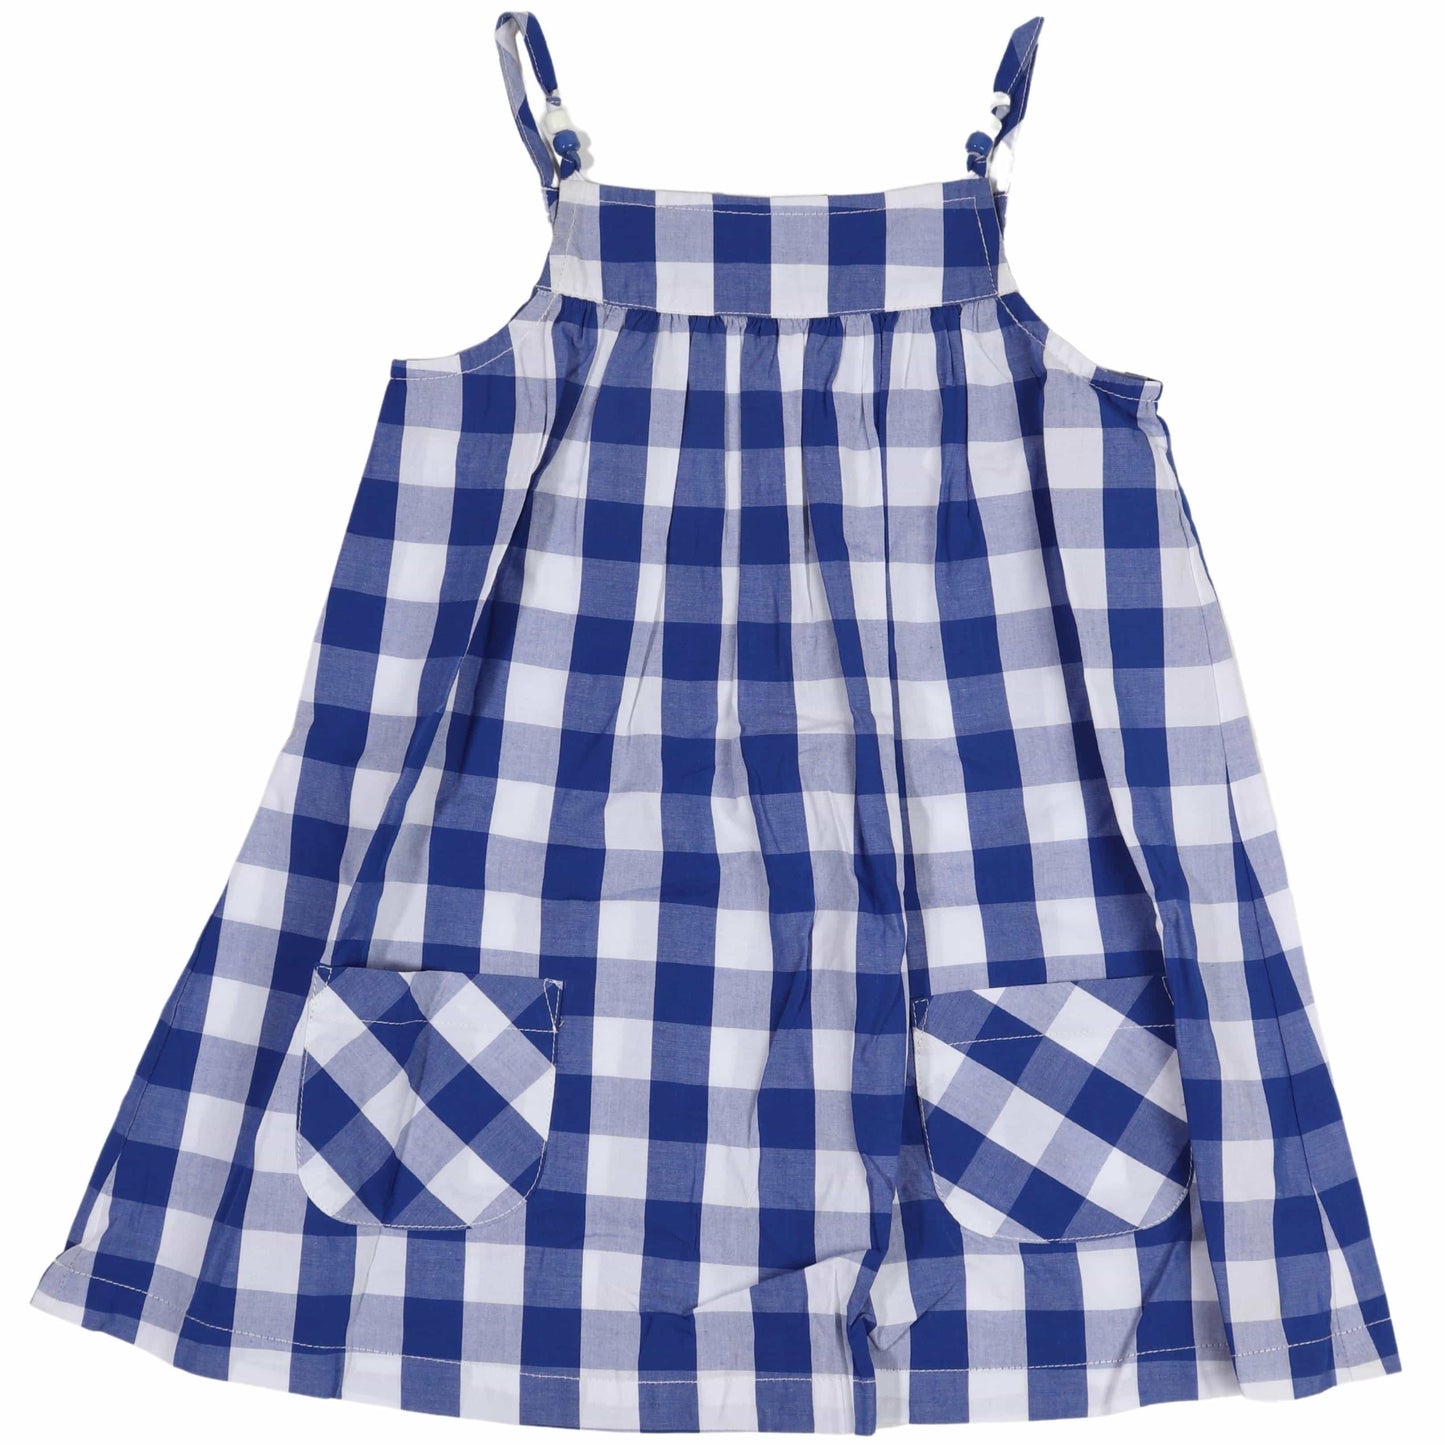 CARTER'S Girls Dress 5 Years / Multi-Color CARTER'S - Baby - Sleeve Less Dress